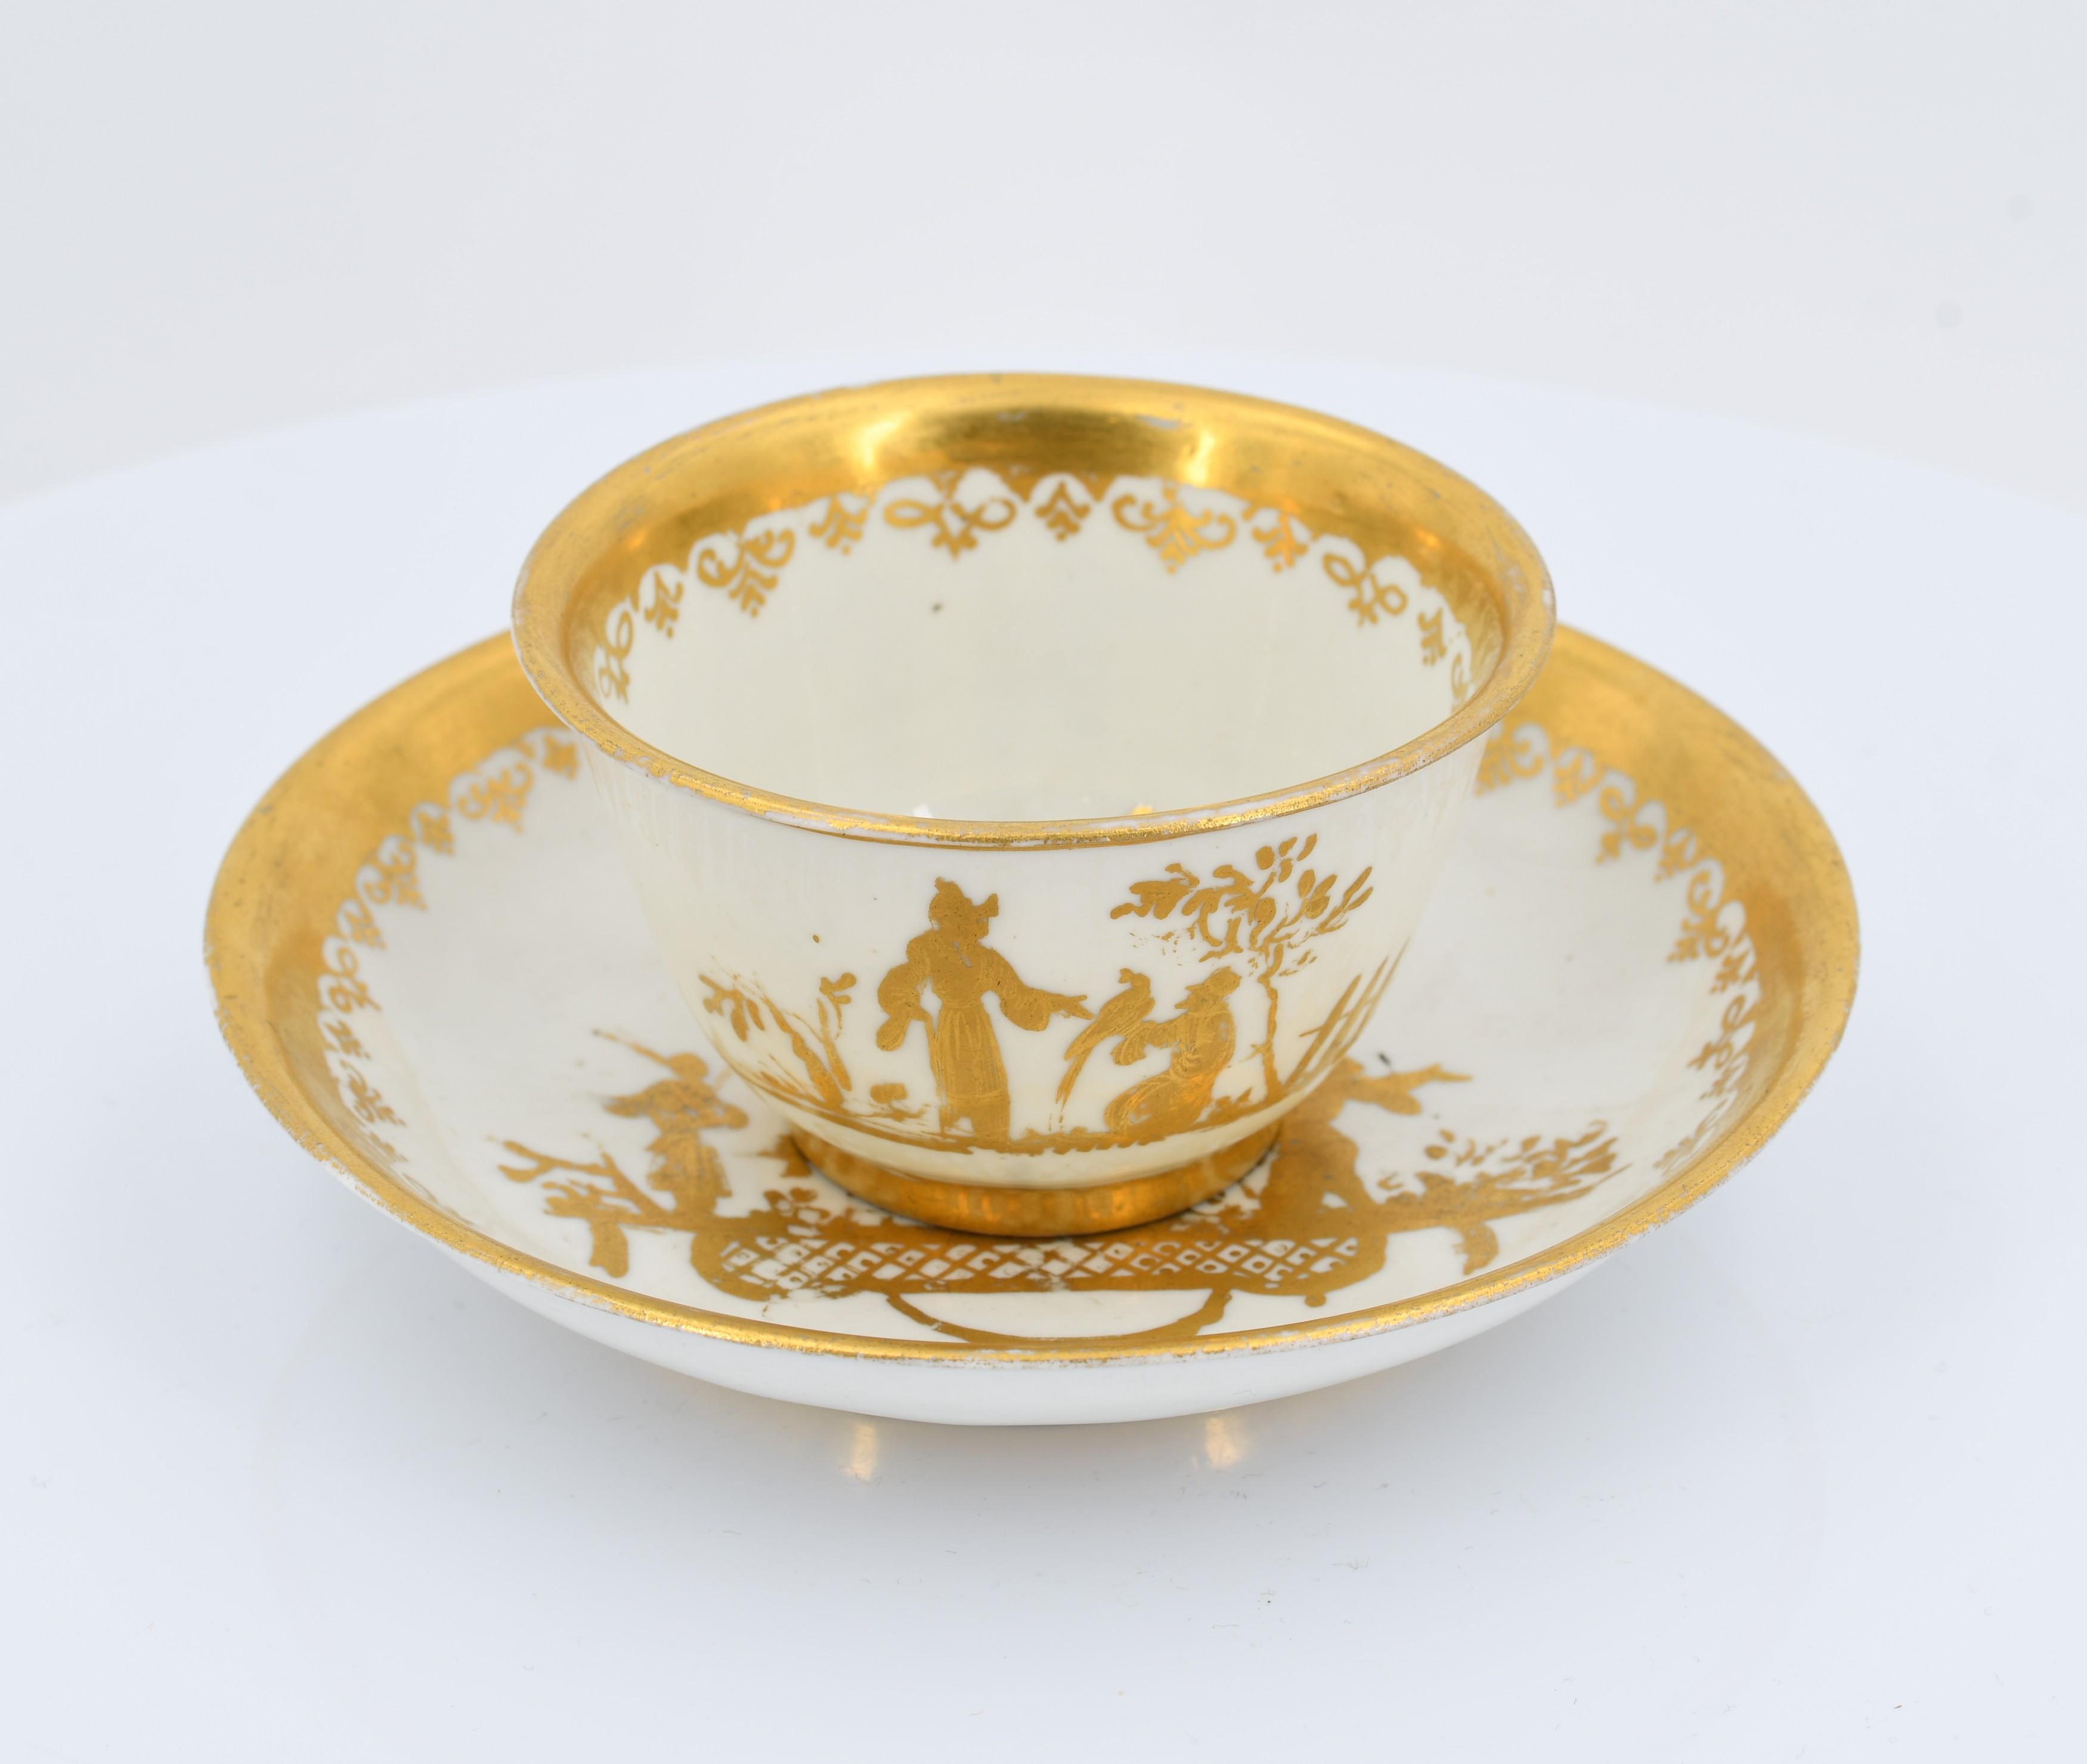 Tea bowl and saucer with gold Chinese décor - Image 2 of 7